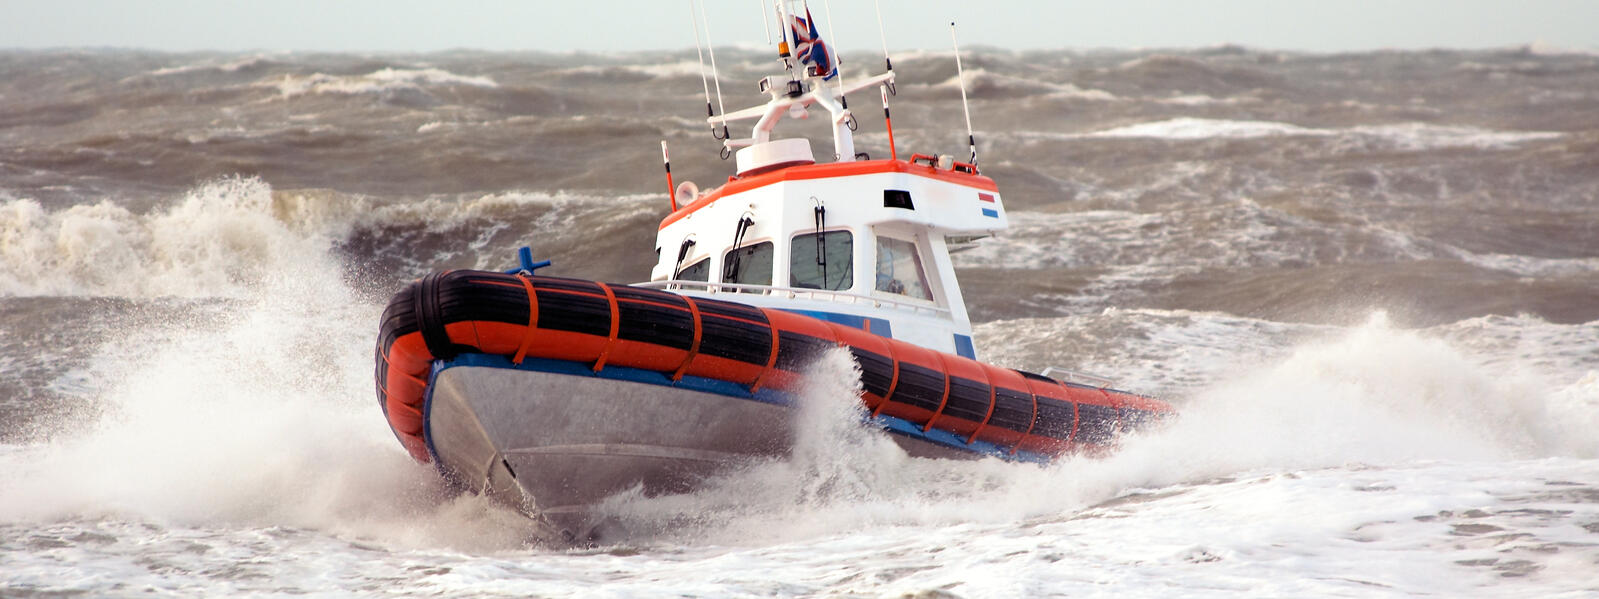 Coast guard boat in stormy waves.